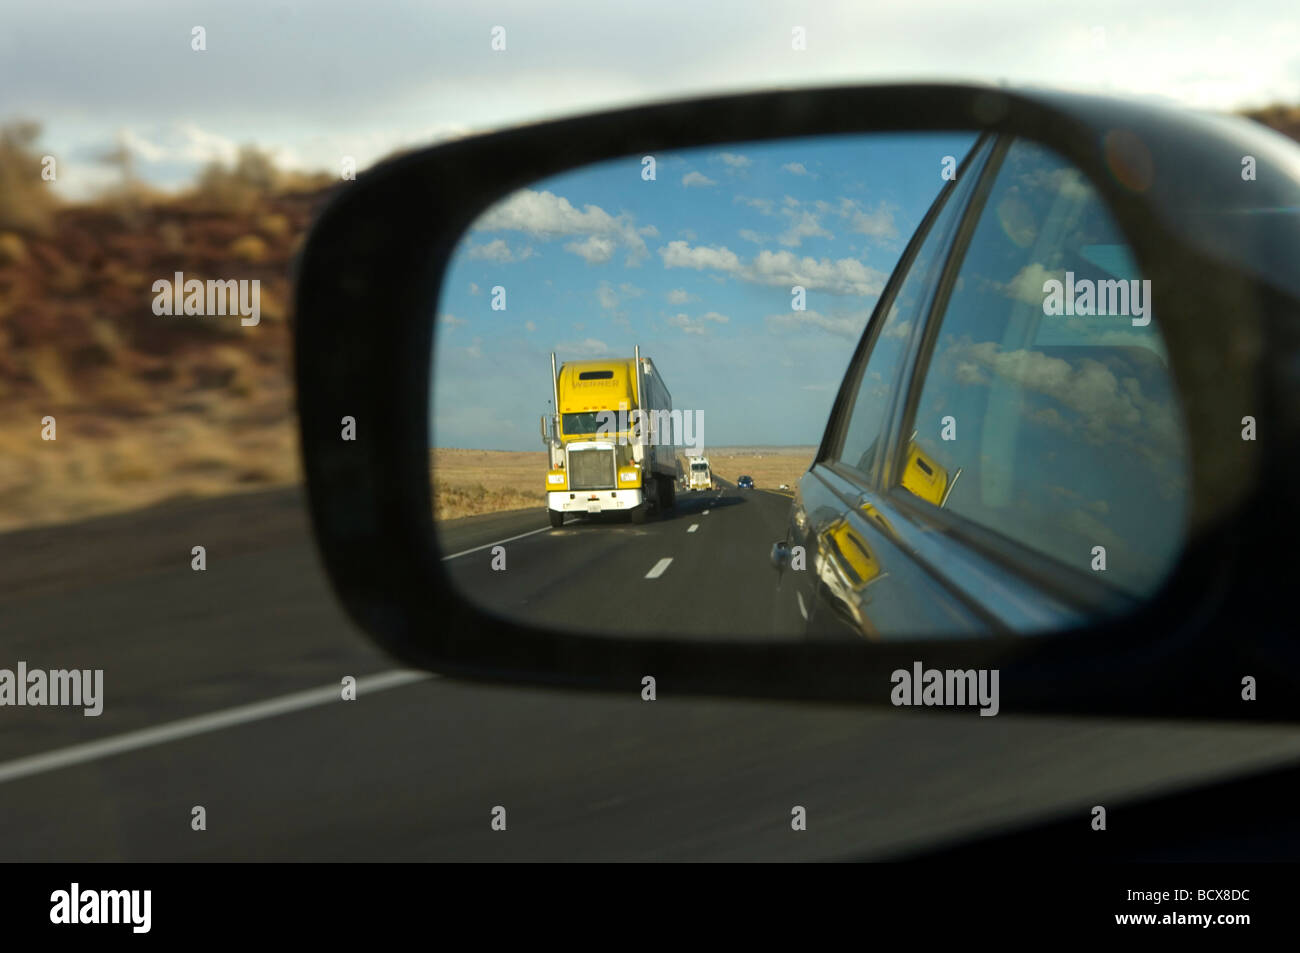 Truck in Rear View Mirror of car on highway. Stock Photo